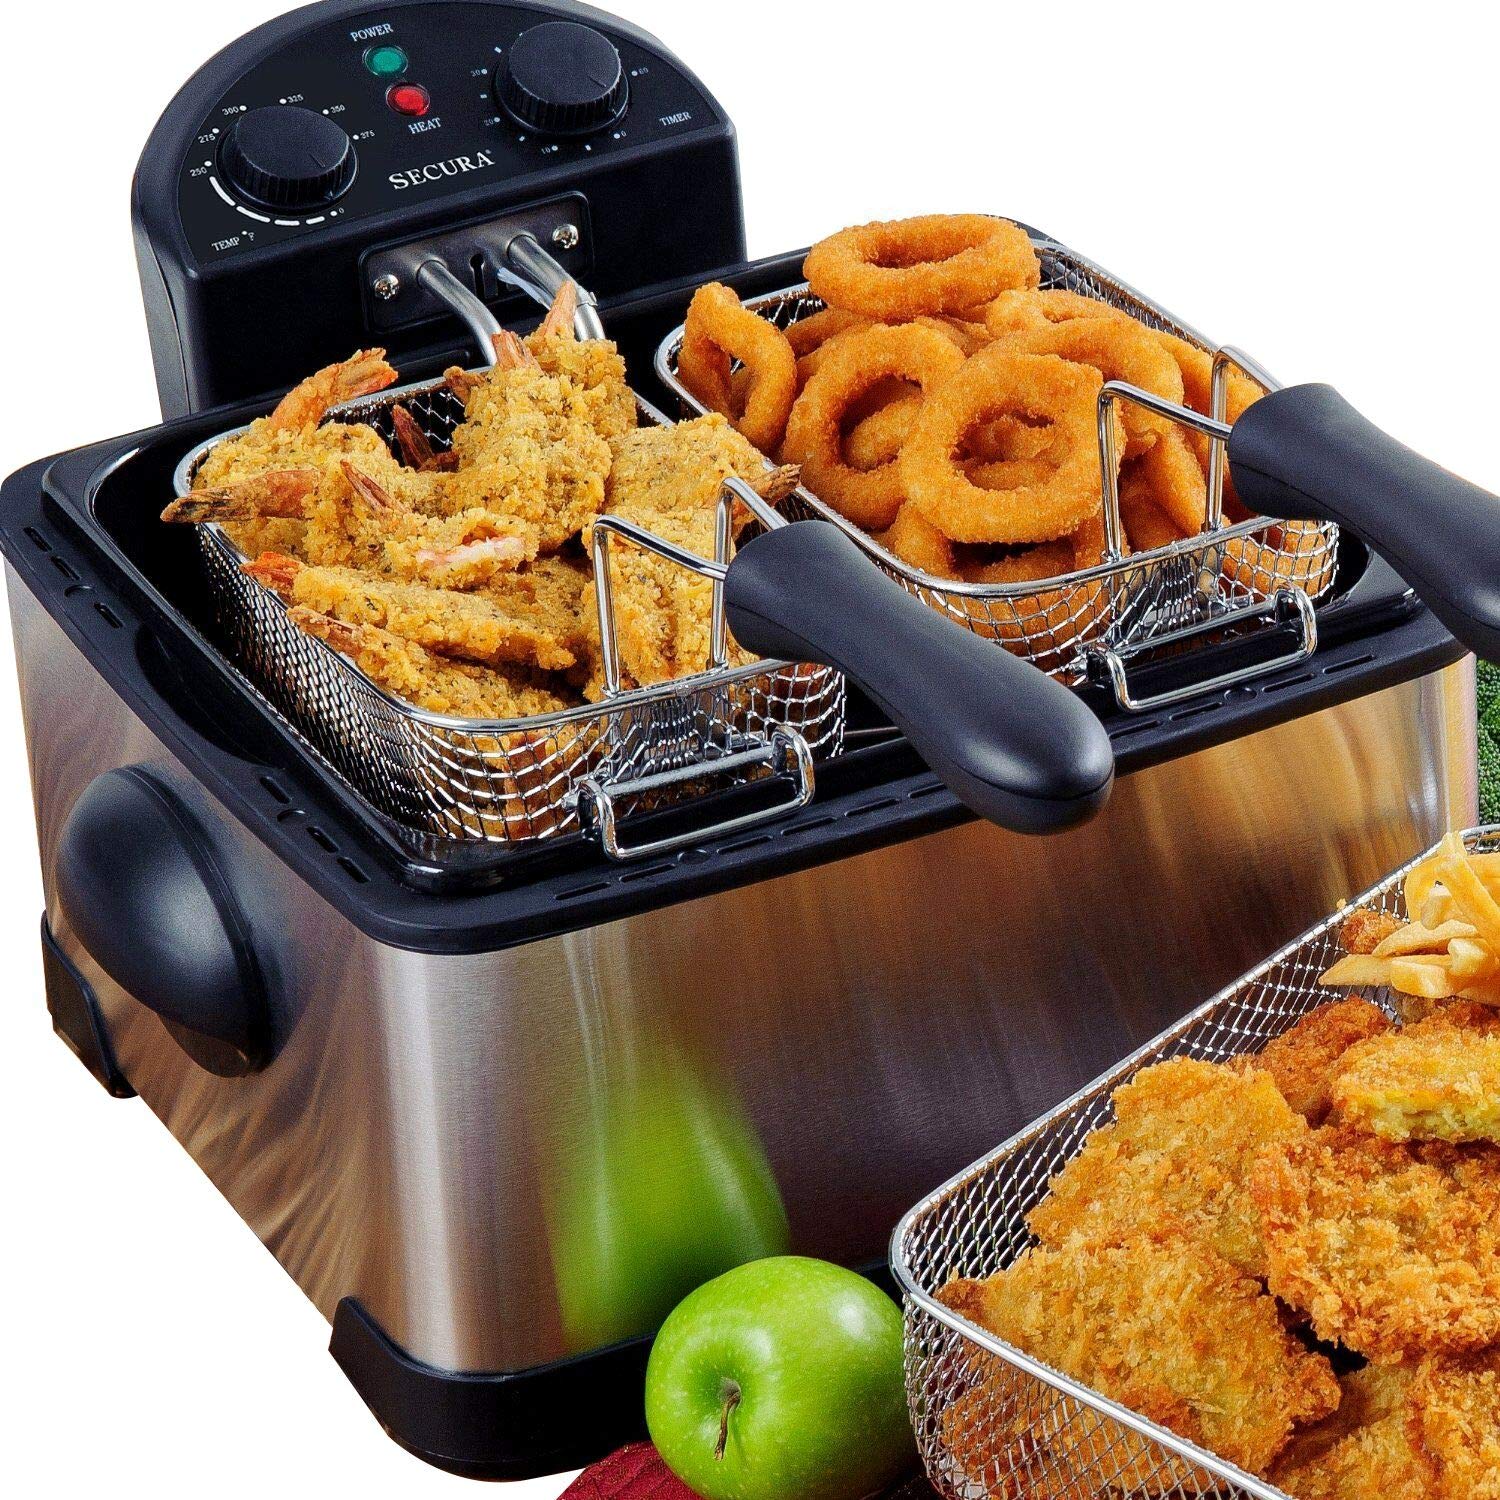 Secura 1700-Watt Stainless-Steel Triple Basket Electric Deep Fryer with  Timer Free Extra Odor Filter, 4L/17-Cup - The Secura